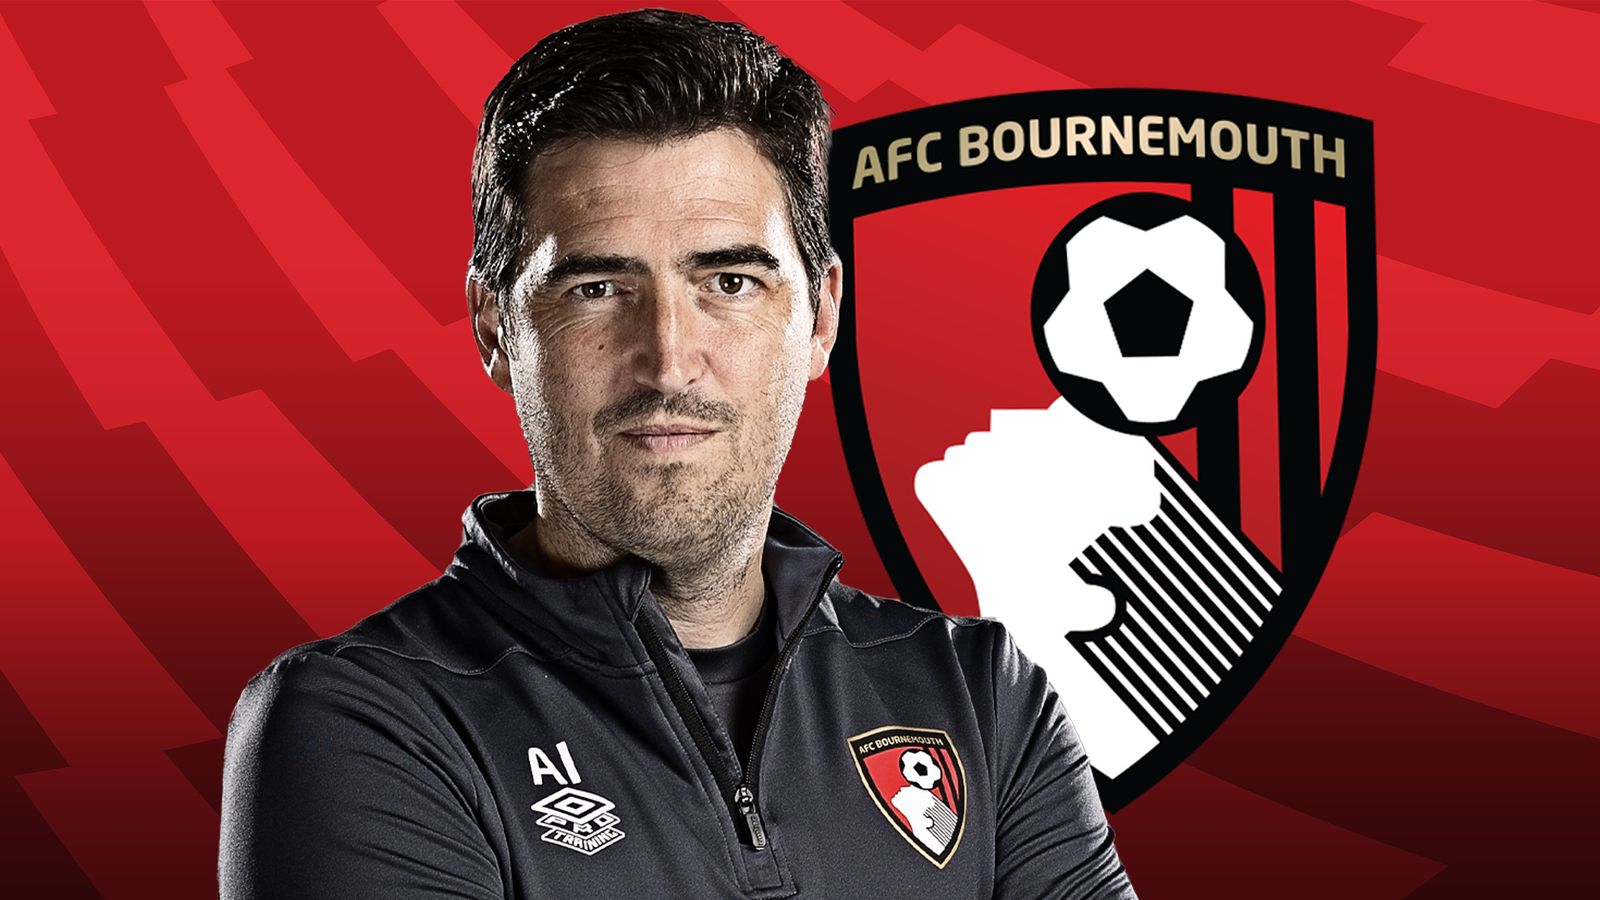  A headshot of Andoni Iraola, the manager of AFC Bournemouth, a professional association football club based in Kings Park, Boscombe, Bournemouth, Dorset, England.